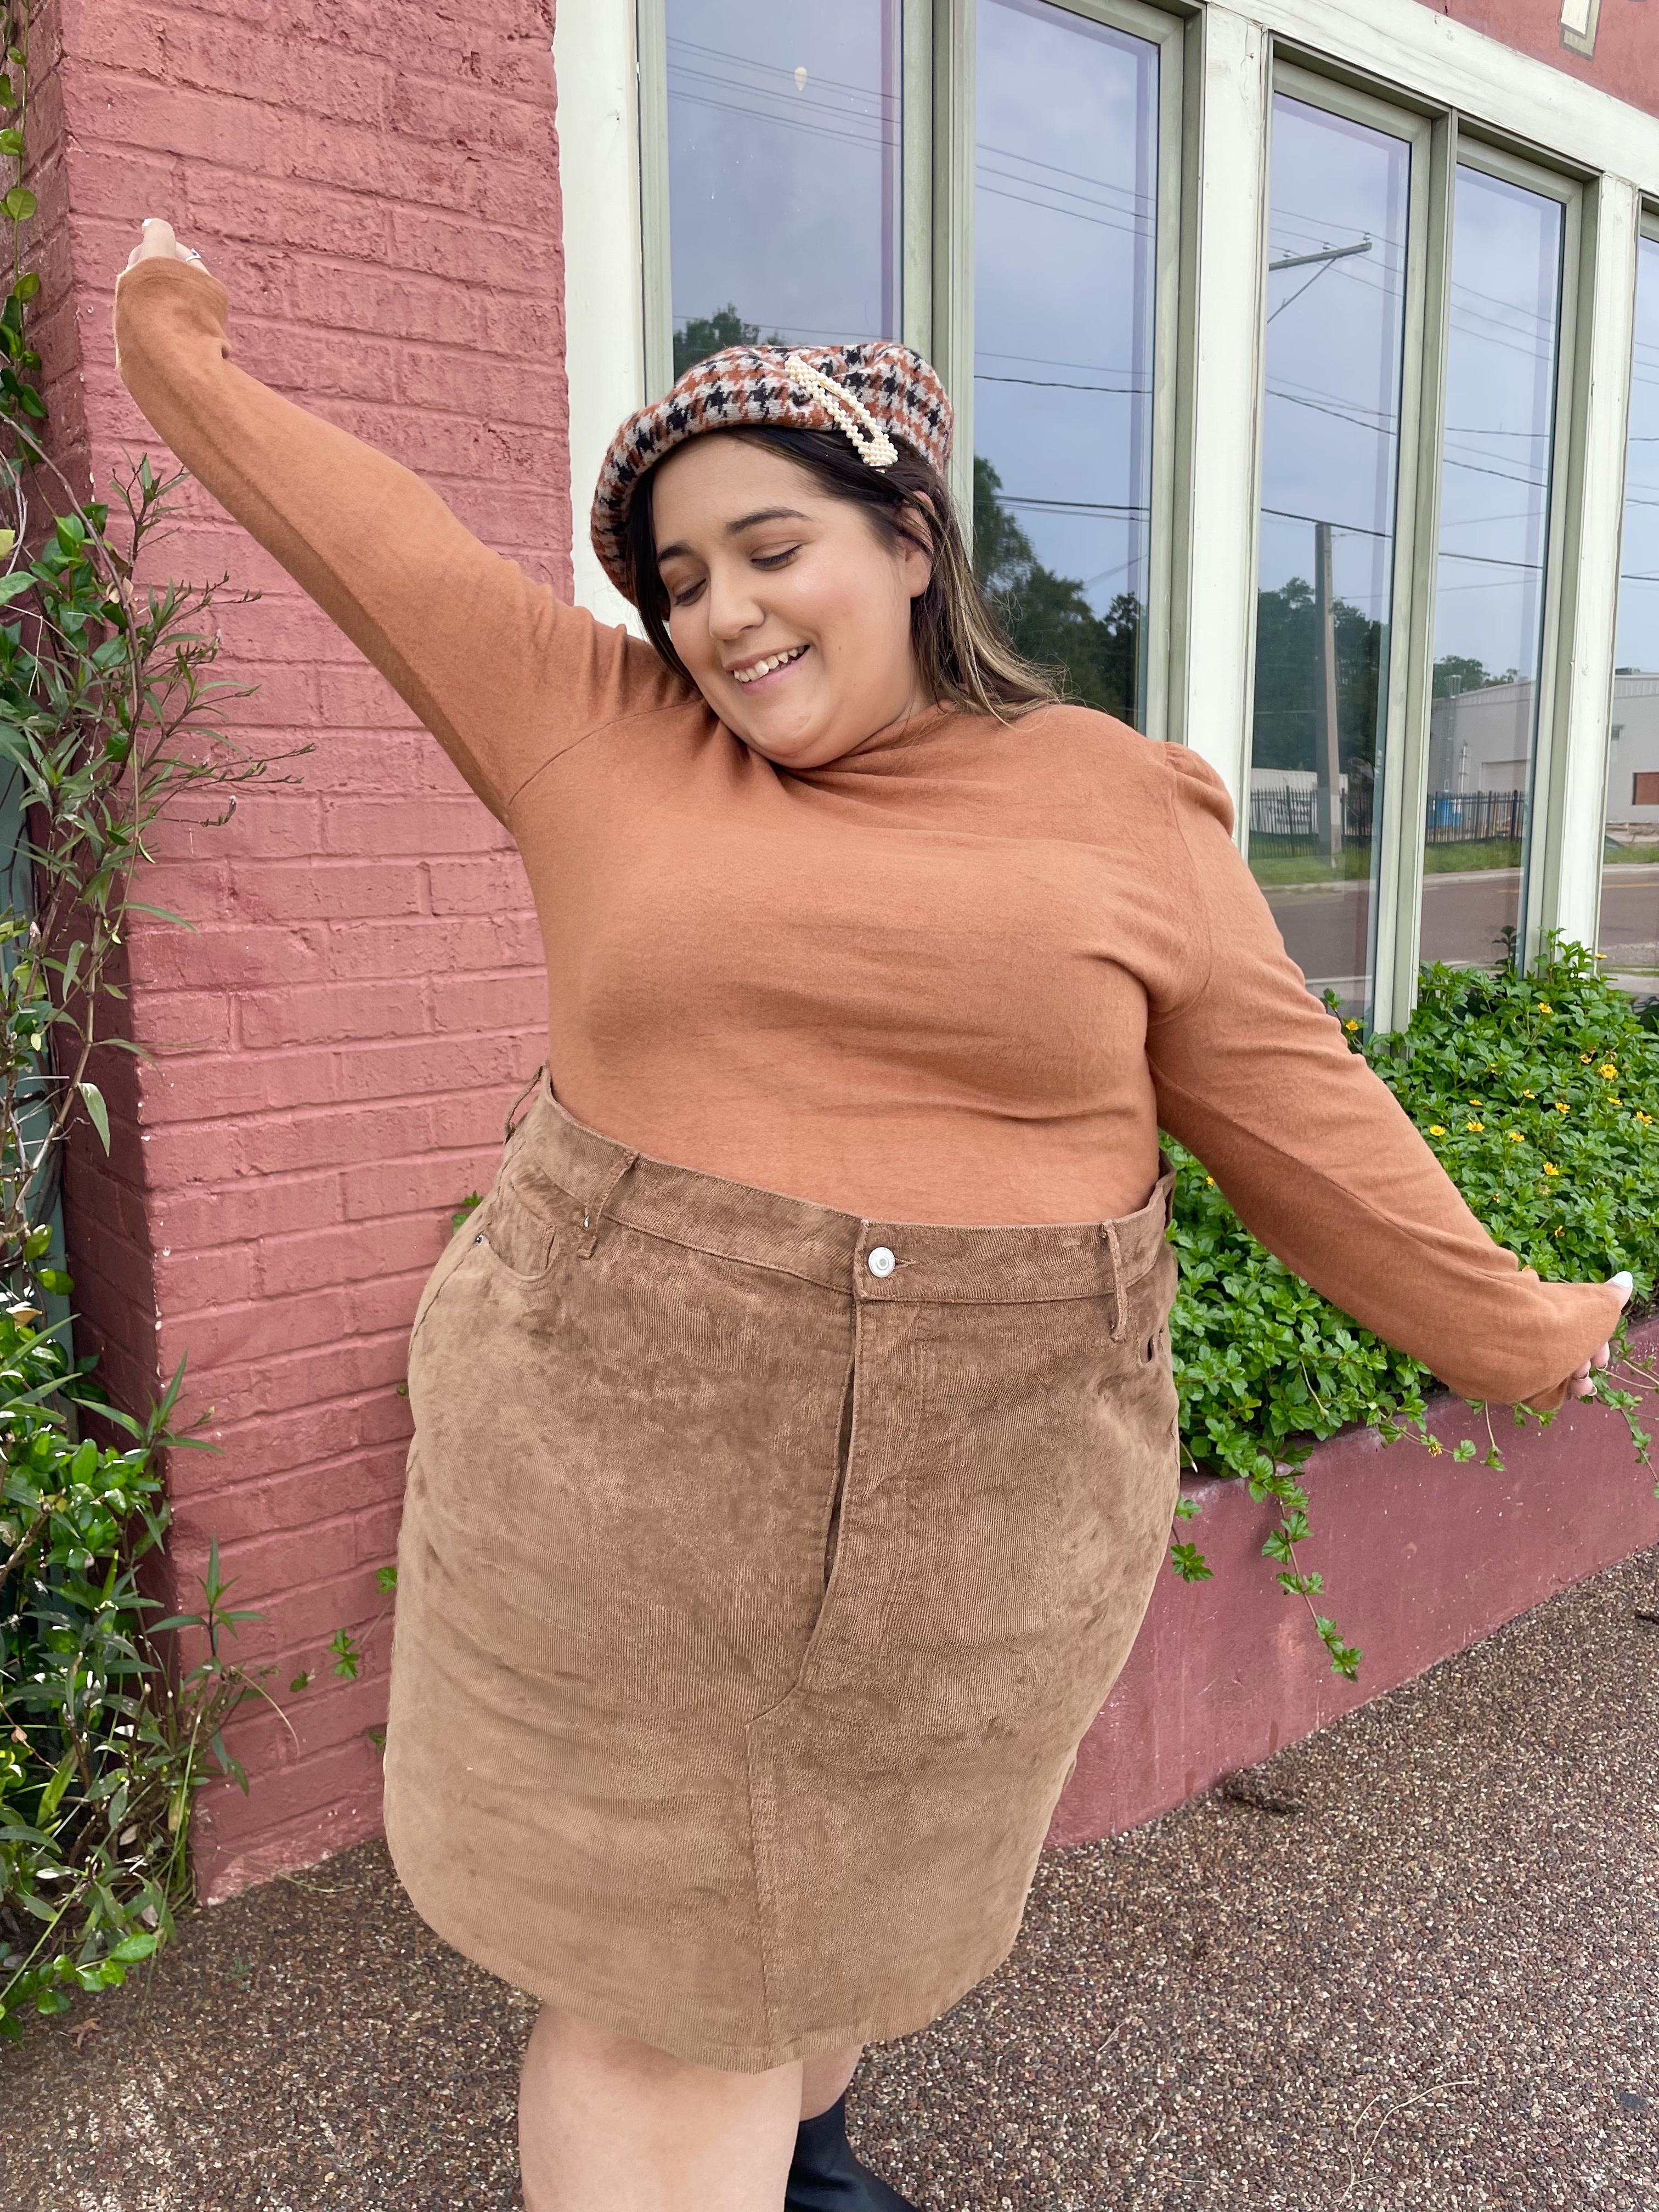 Pumpkin Spice & Everything Nice | Chic Soul $100 Giveaway